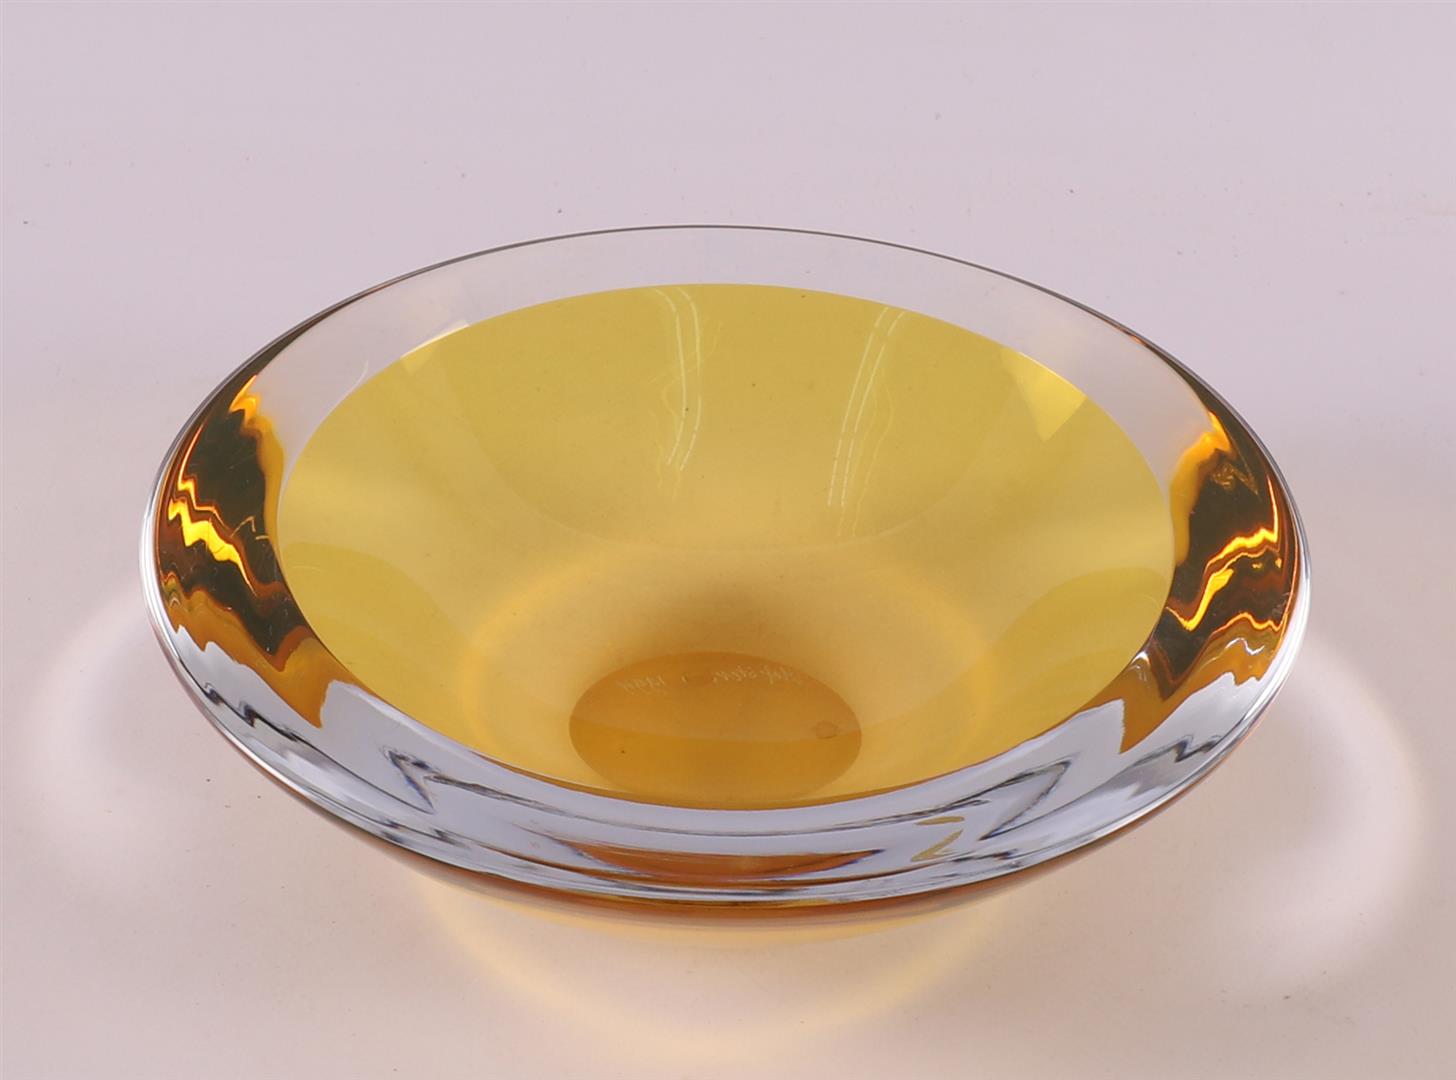 A thick-walled yellow and clear glass bowl, Olaf Stevens (Tilburg 1994-).